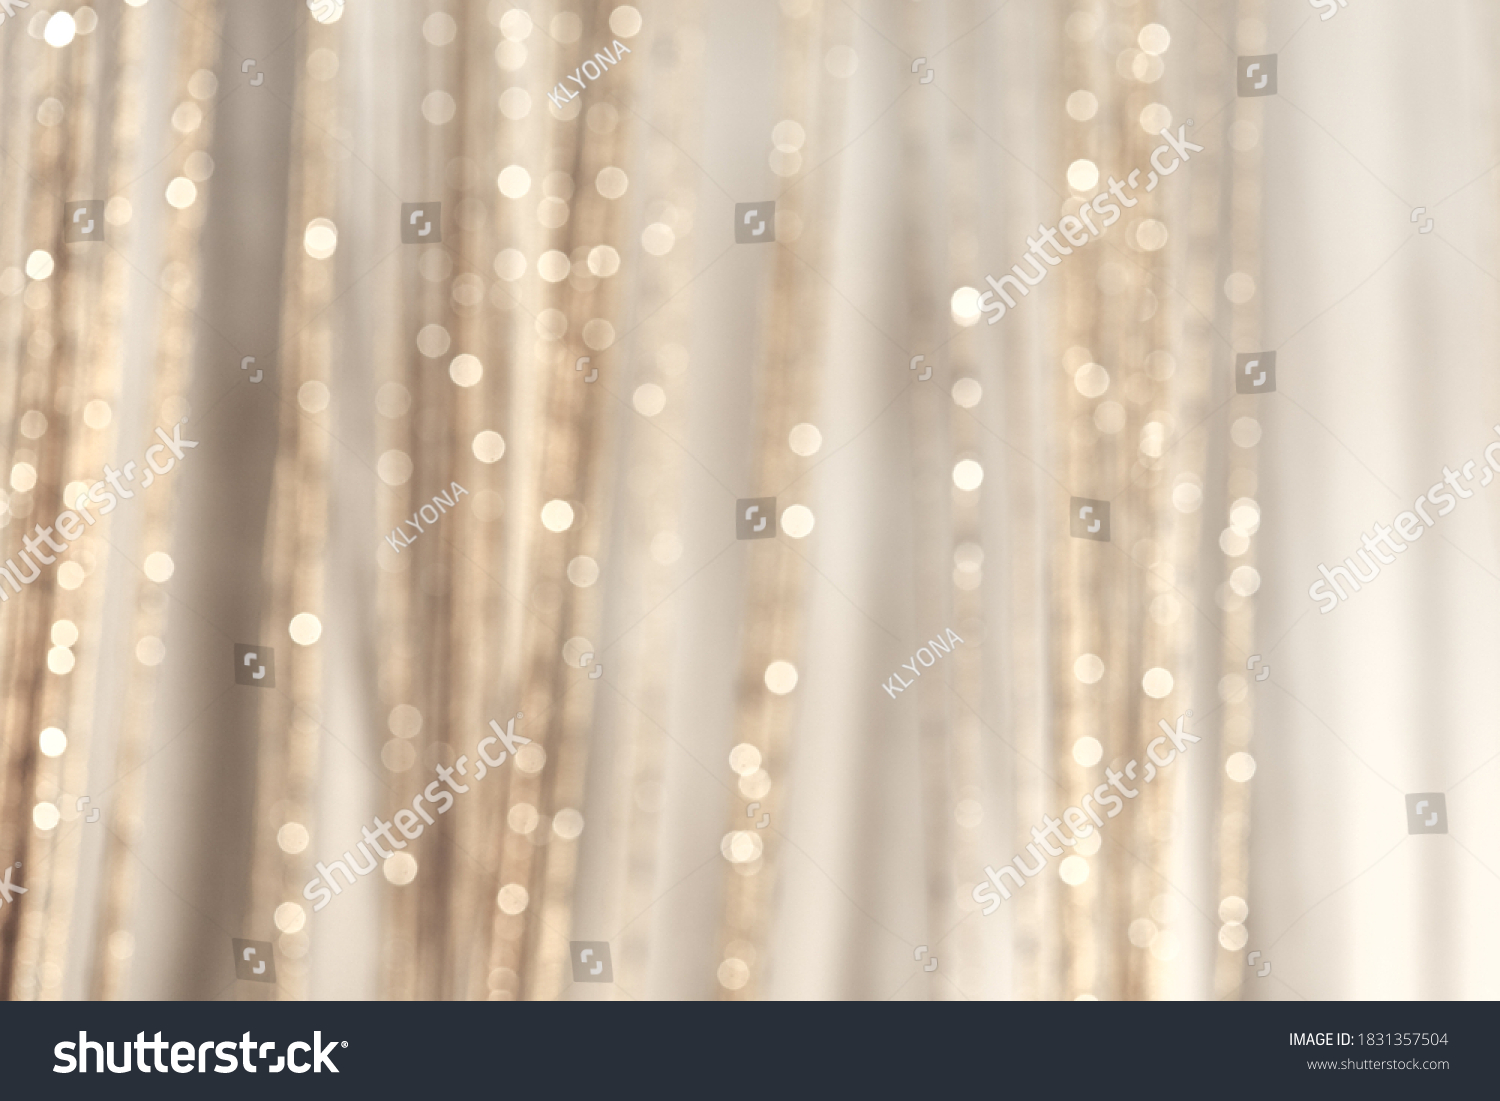 Abstract pastel blurred background. Mysterious Christmas defocused background. Festive frame with twinkling bokeh stars. Abstract blurred bokeh curtain.Tender background in milky gray tones. #1831357504